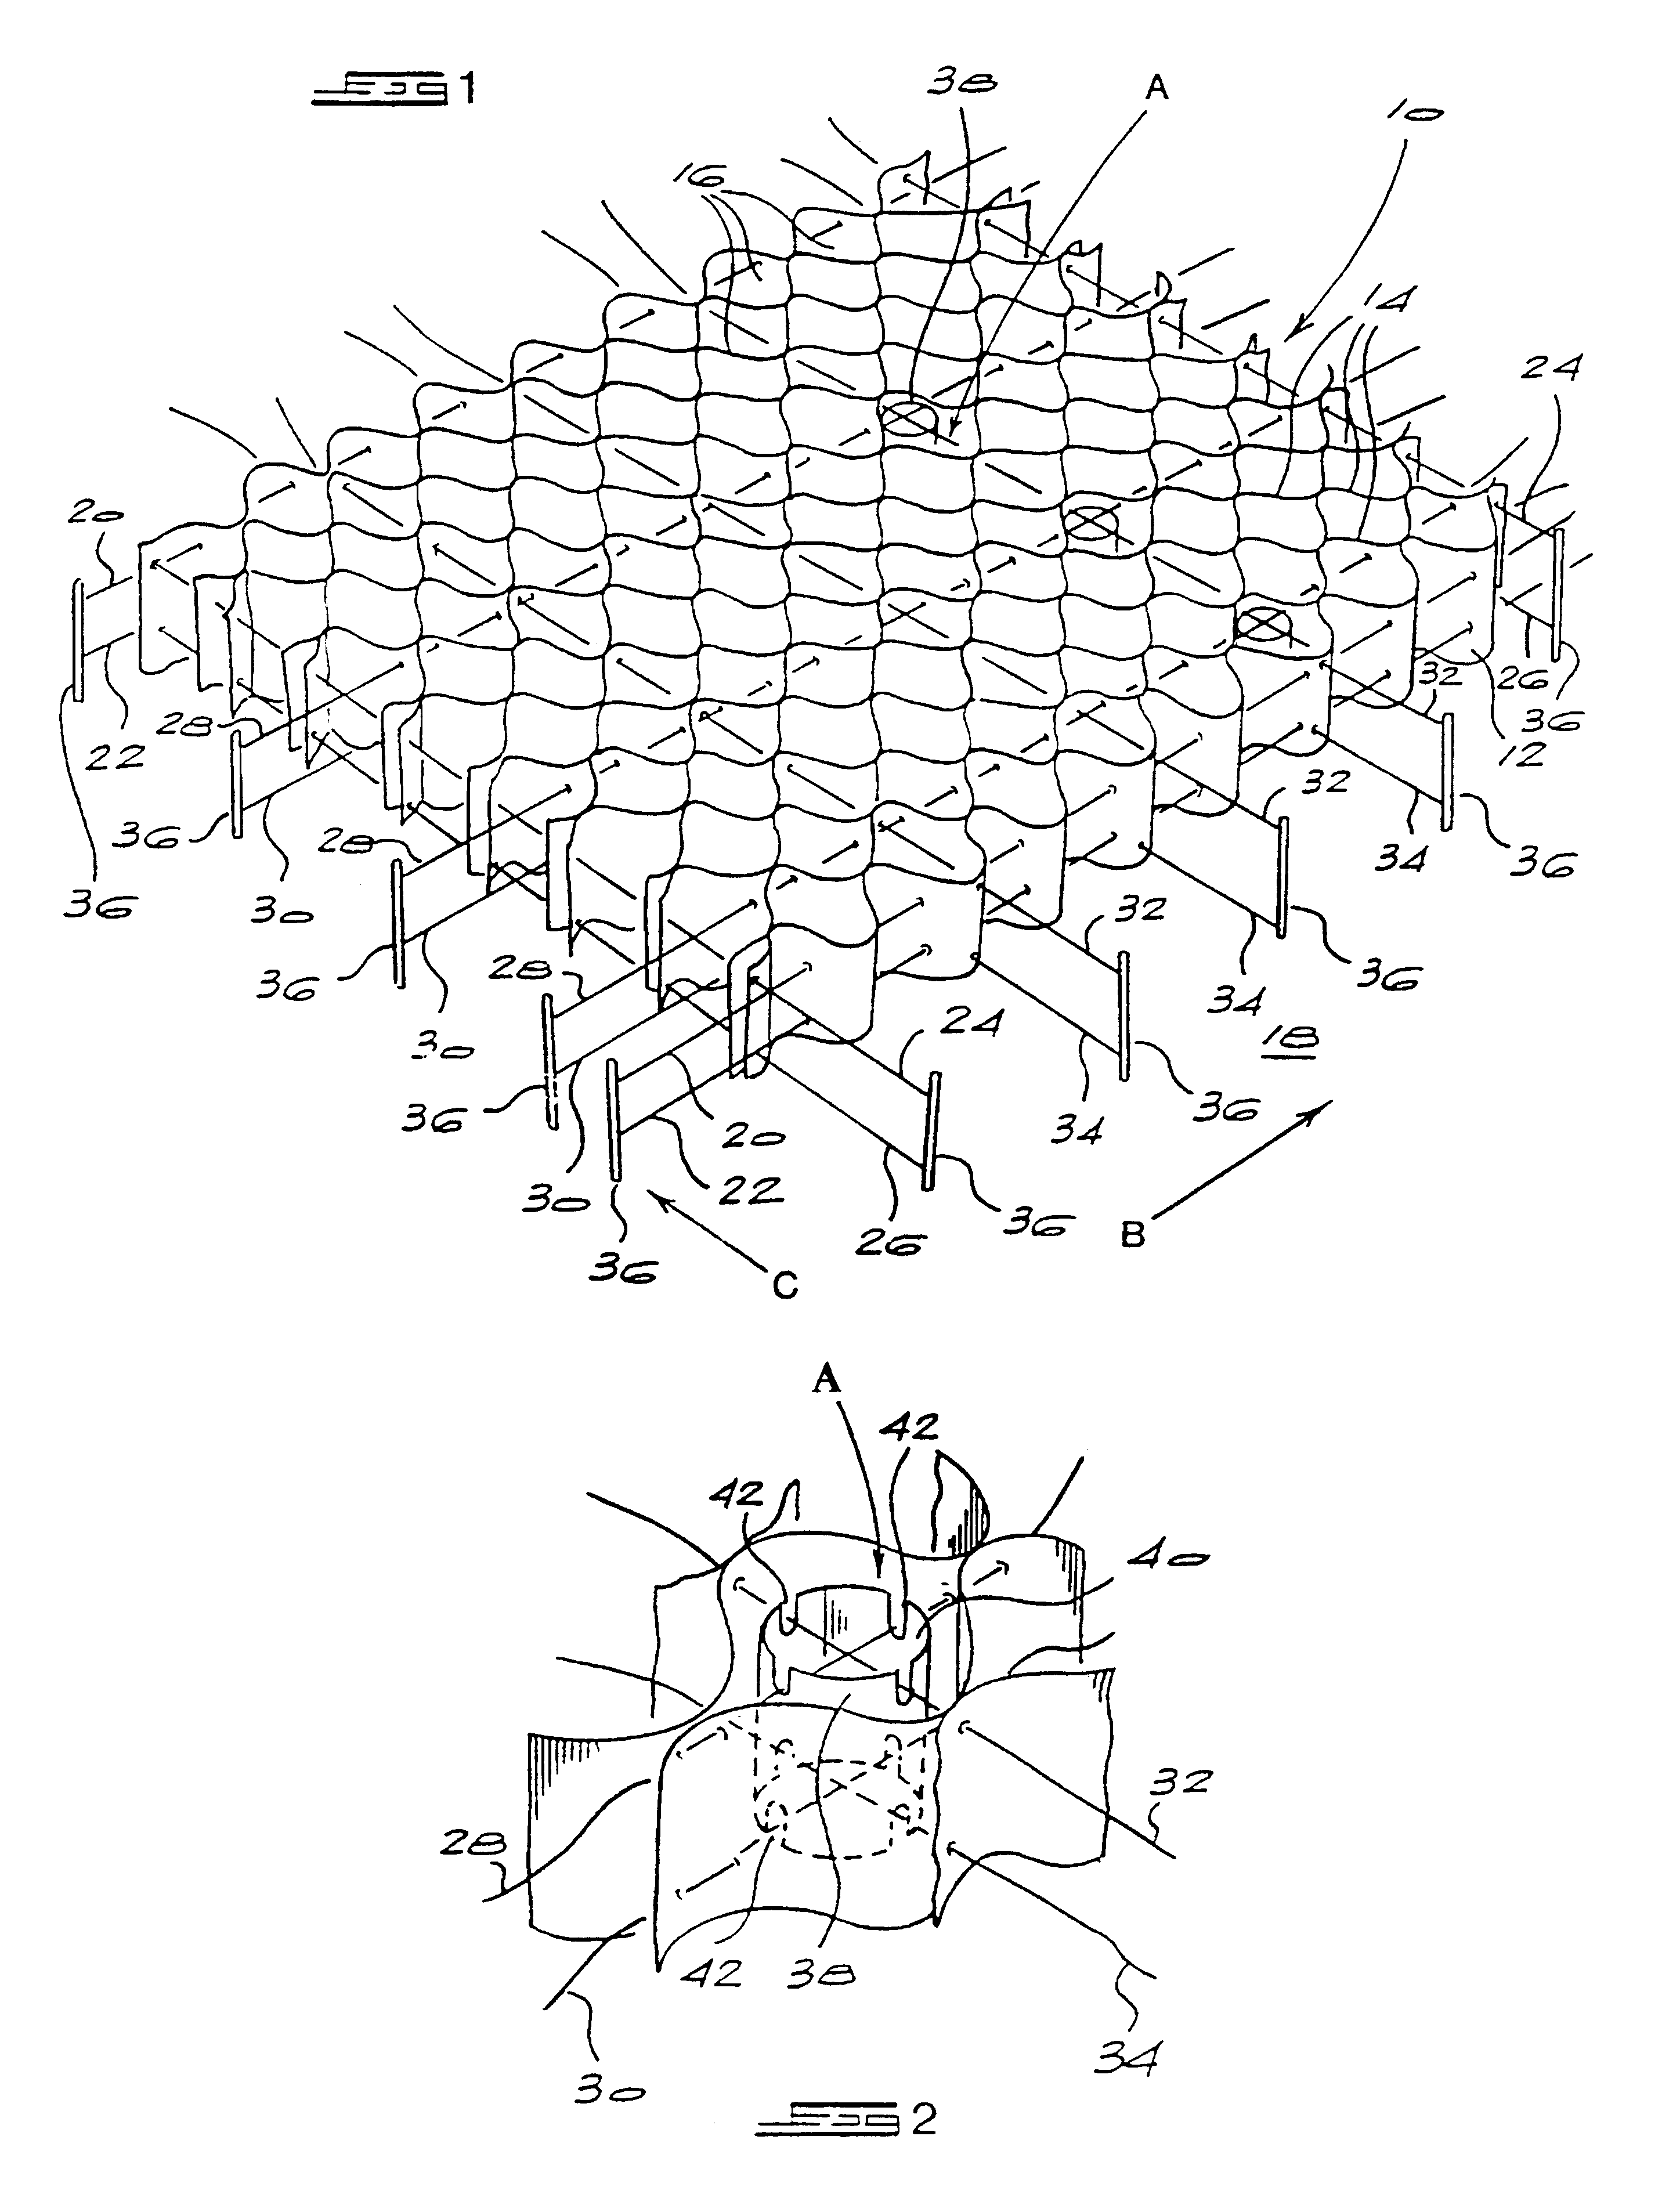 Method of forming a support structure using strings or stays